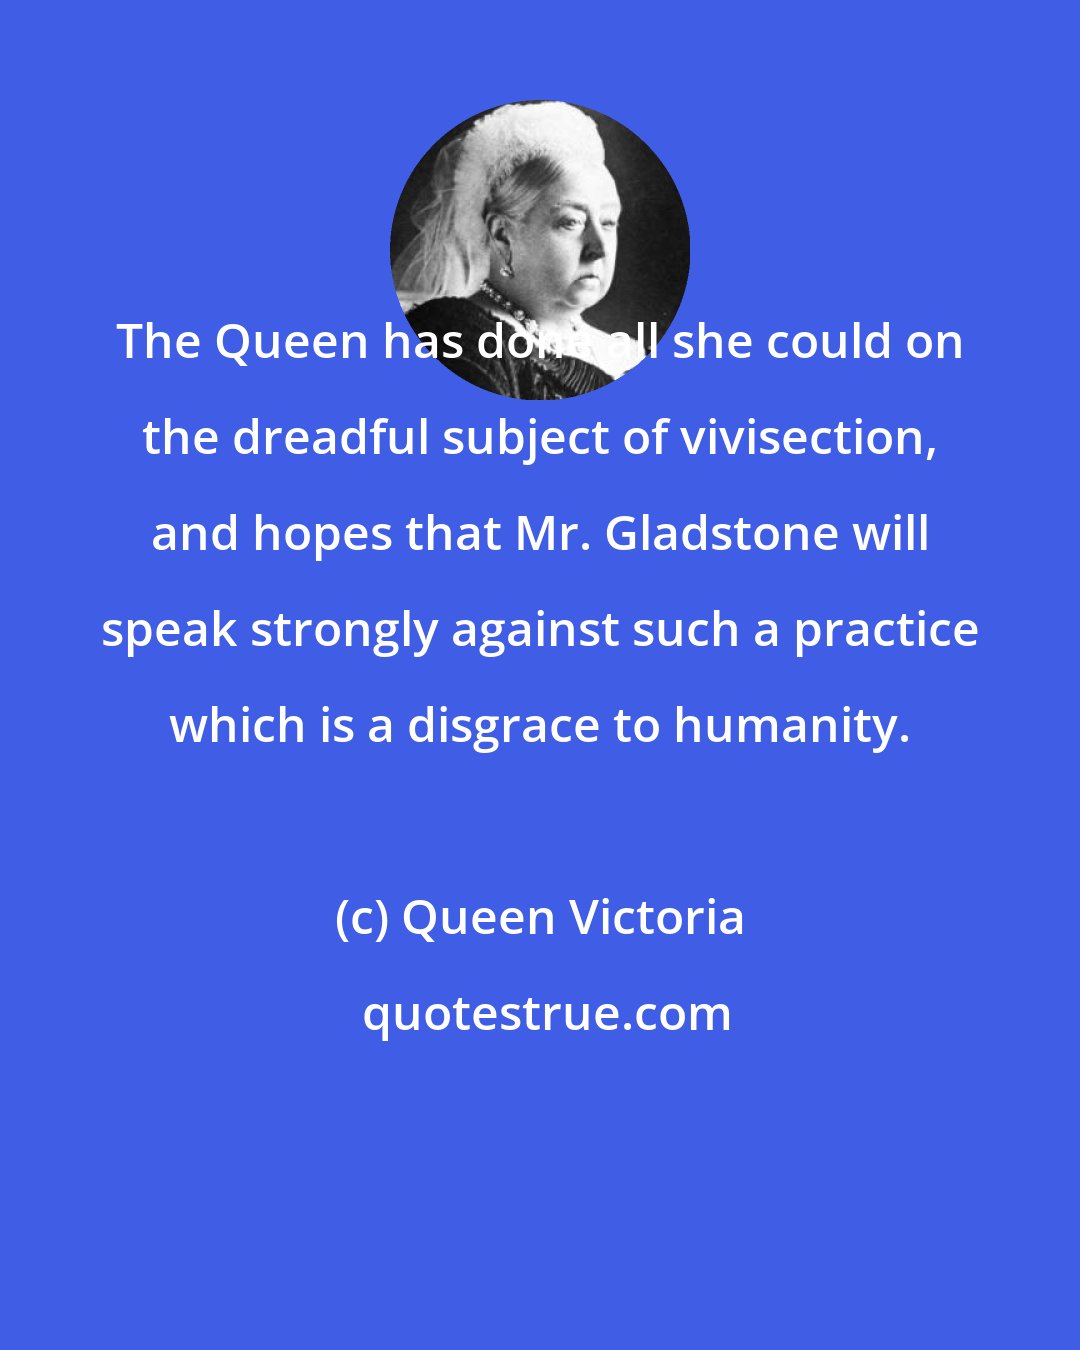 Queen Victoria: The Queen has done all she could on the dreadful subject of vivisection, and hopes that Mr. Gladstone will speak strongly against such a practice which is a disgrace to humanity.